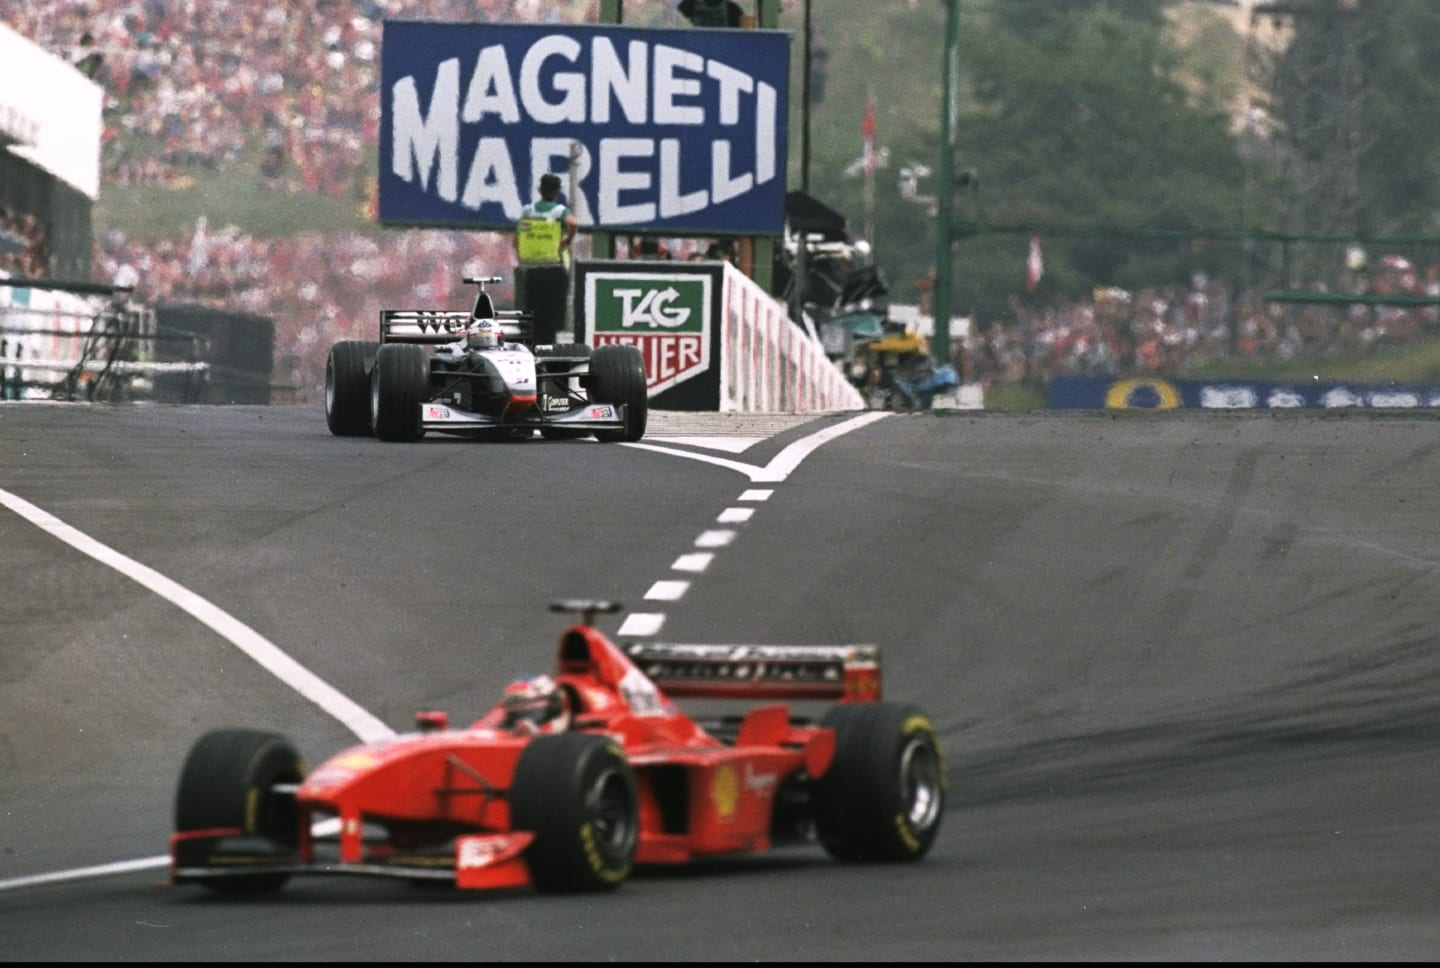 14-16 Aug 1998:  Ferrari driver Michael Schumacher of Germany goes into the lead as